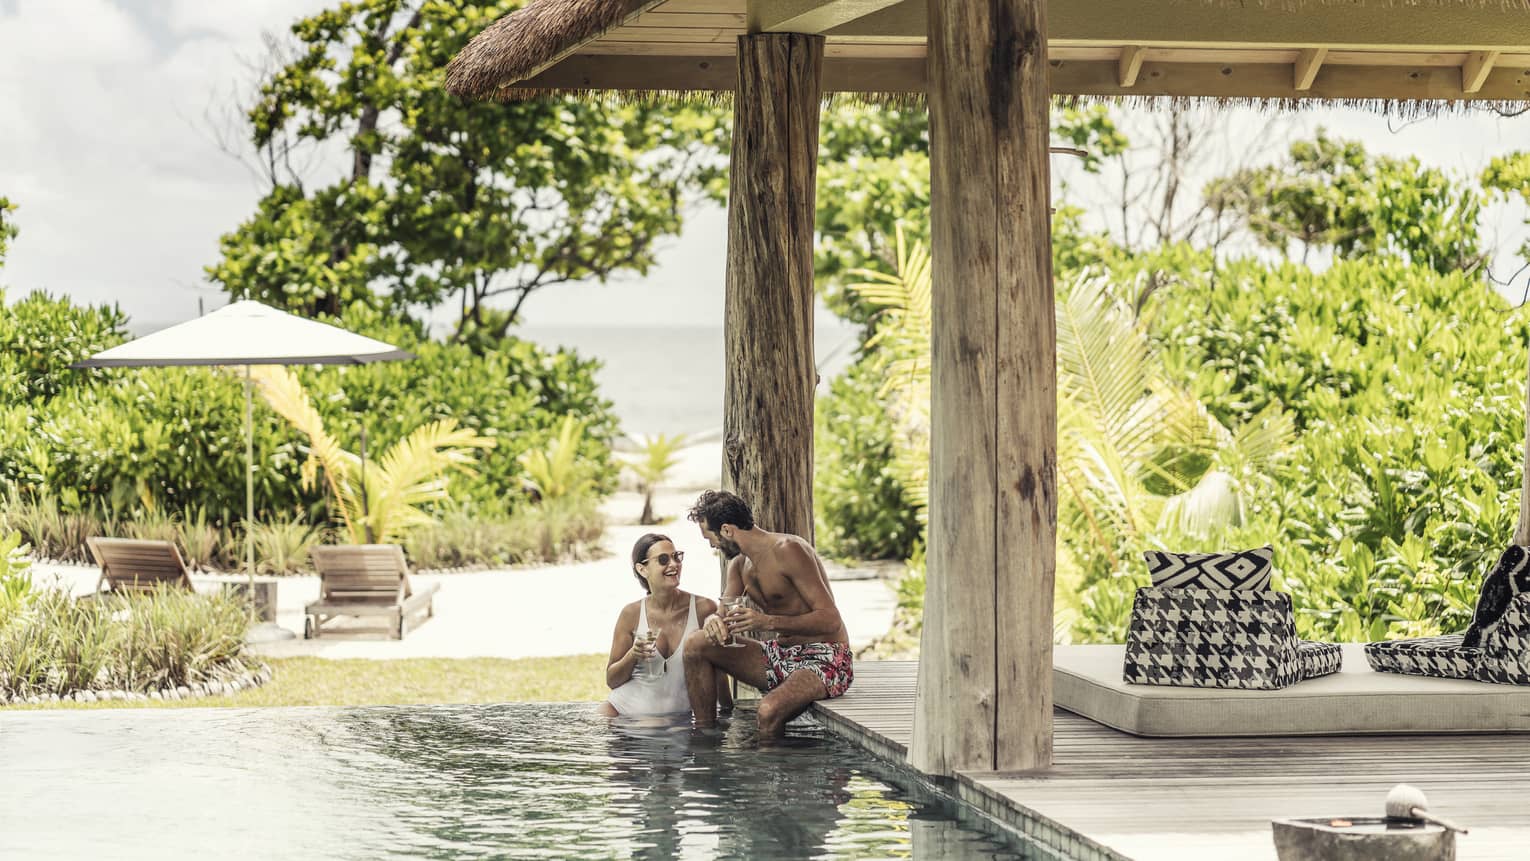 Couple in villa pool under thatched roof and view of tropical foliage